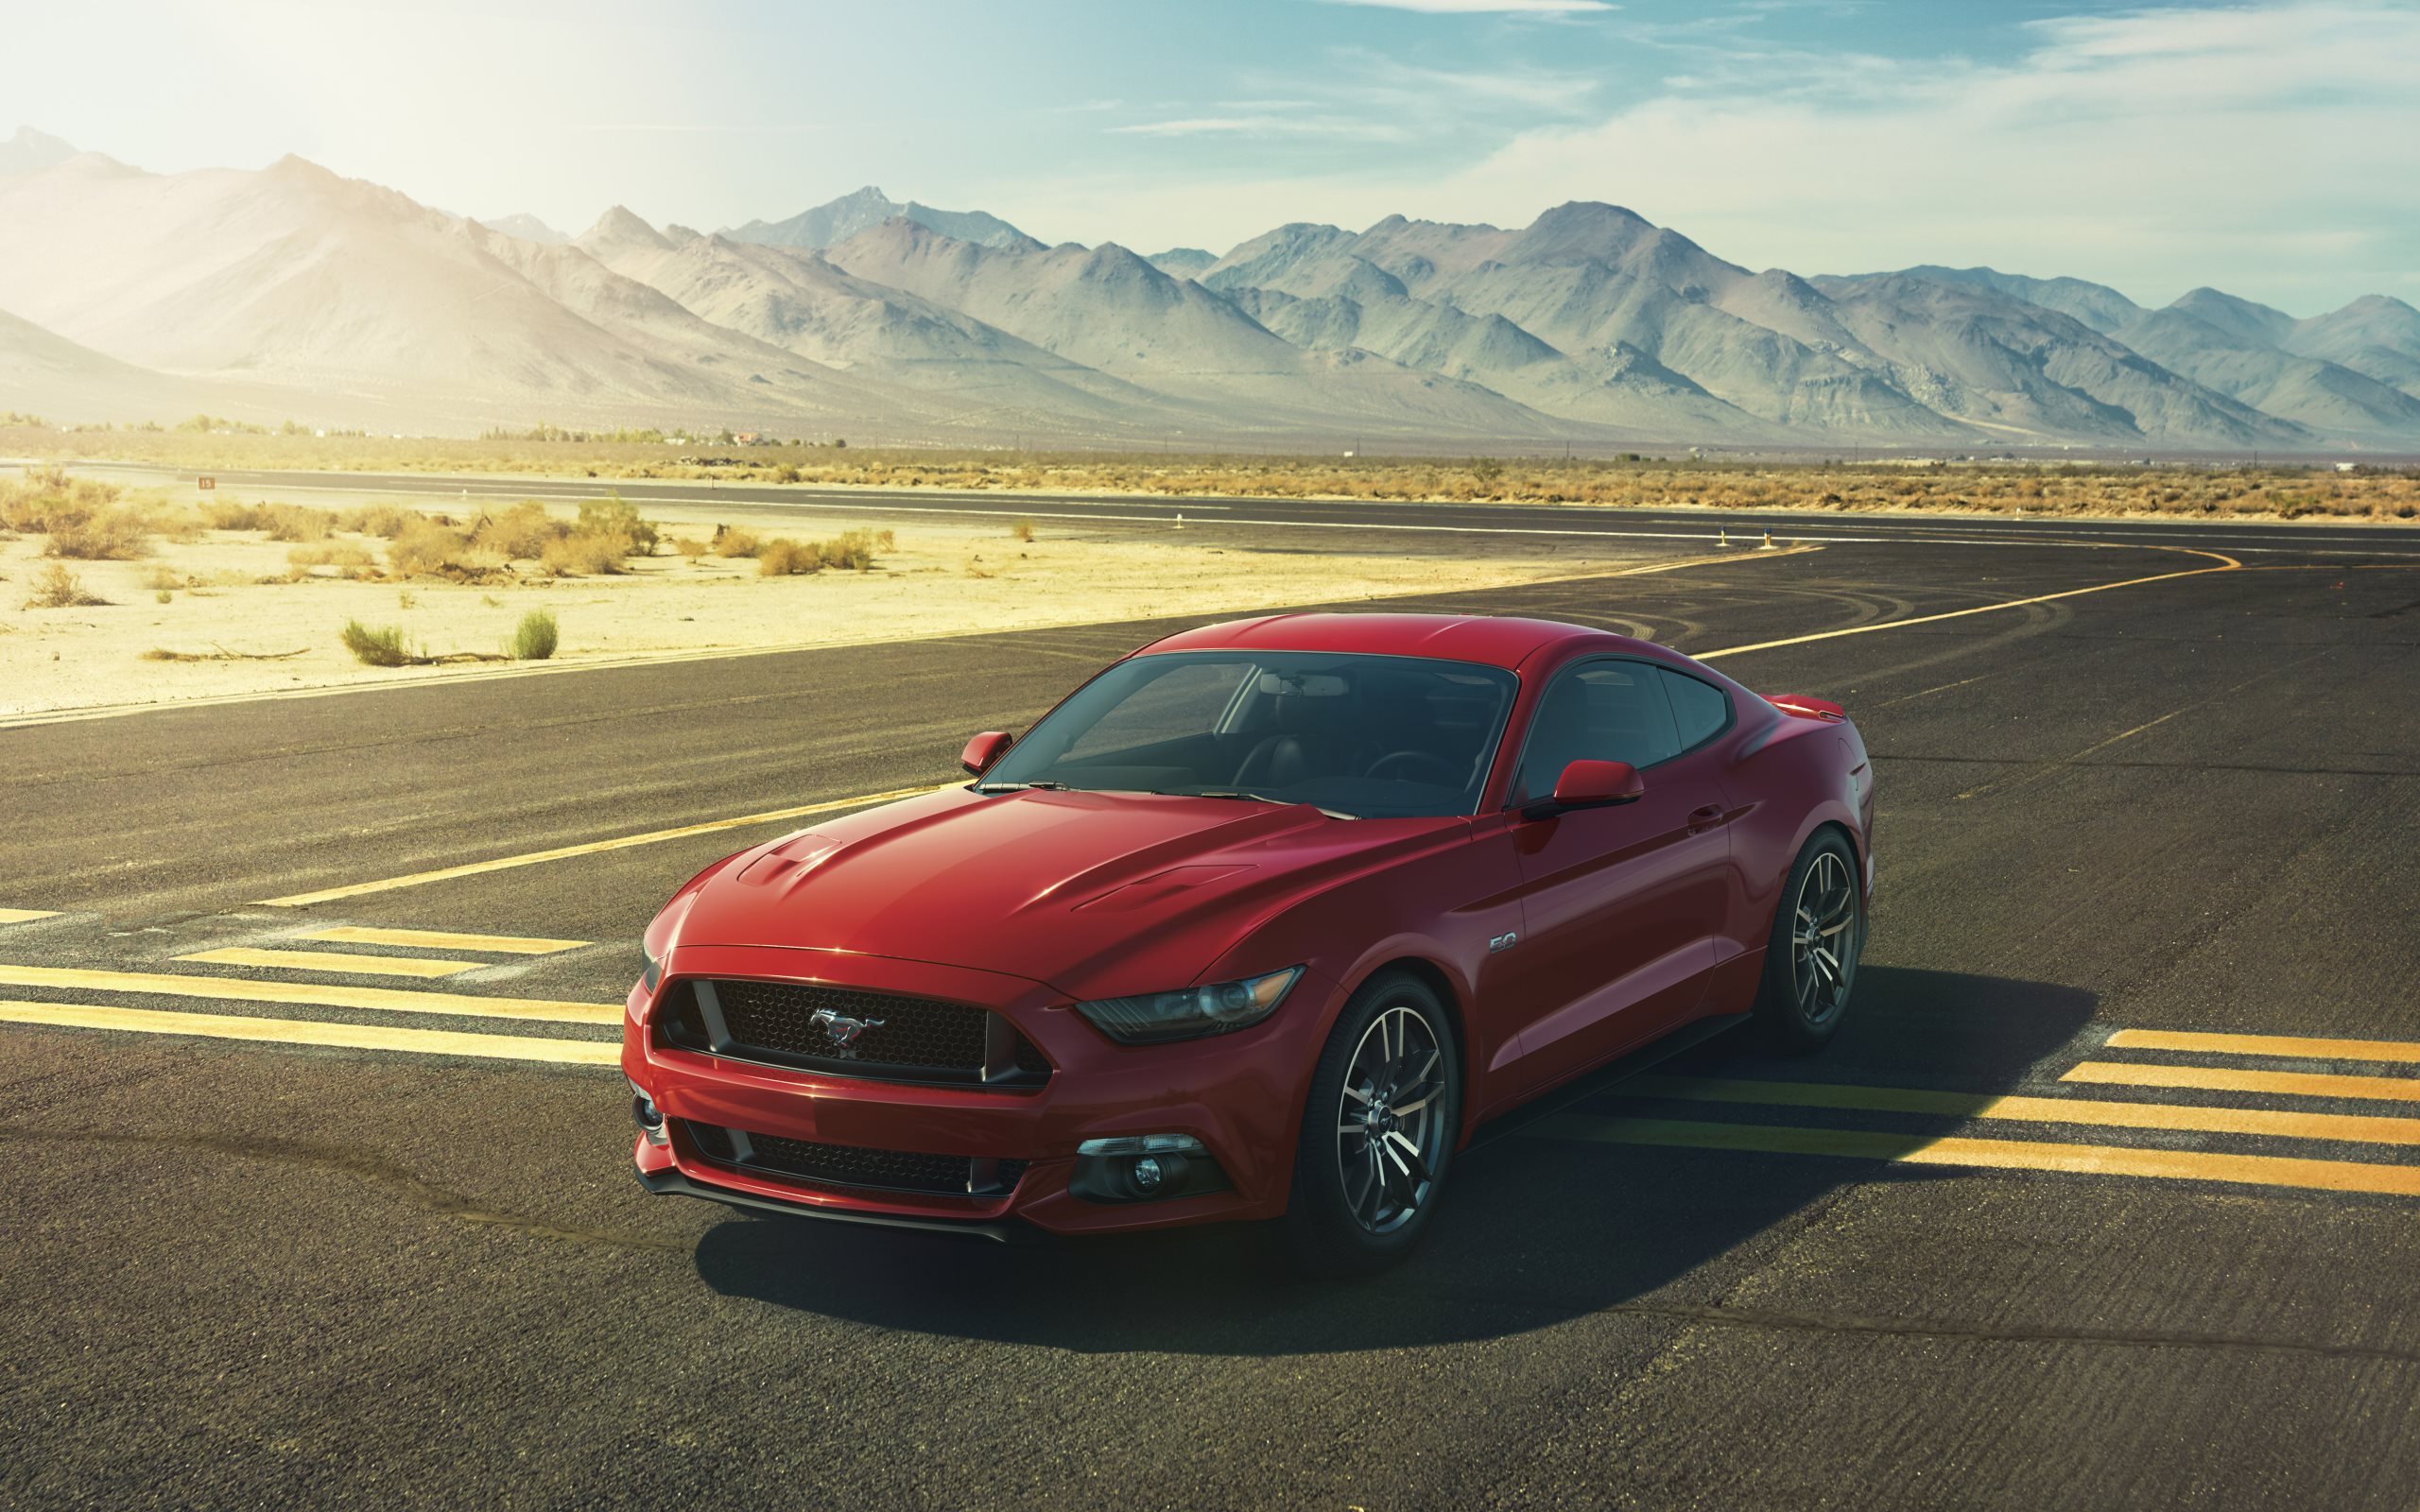 ford mustang, vehicles, ford Image for desktop